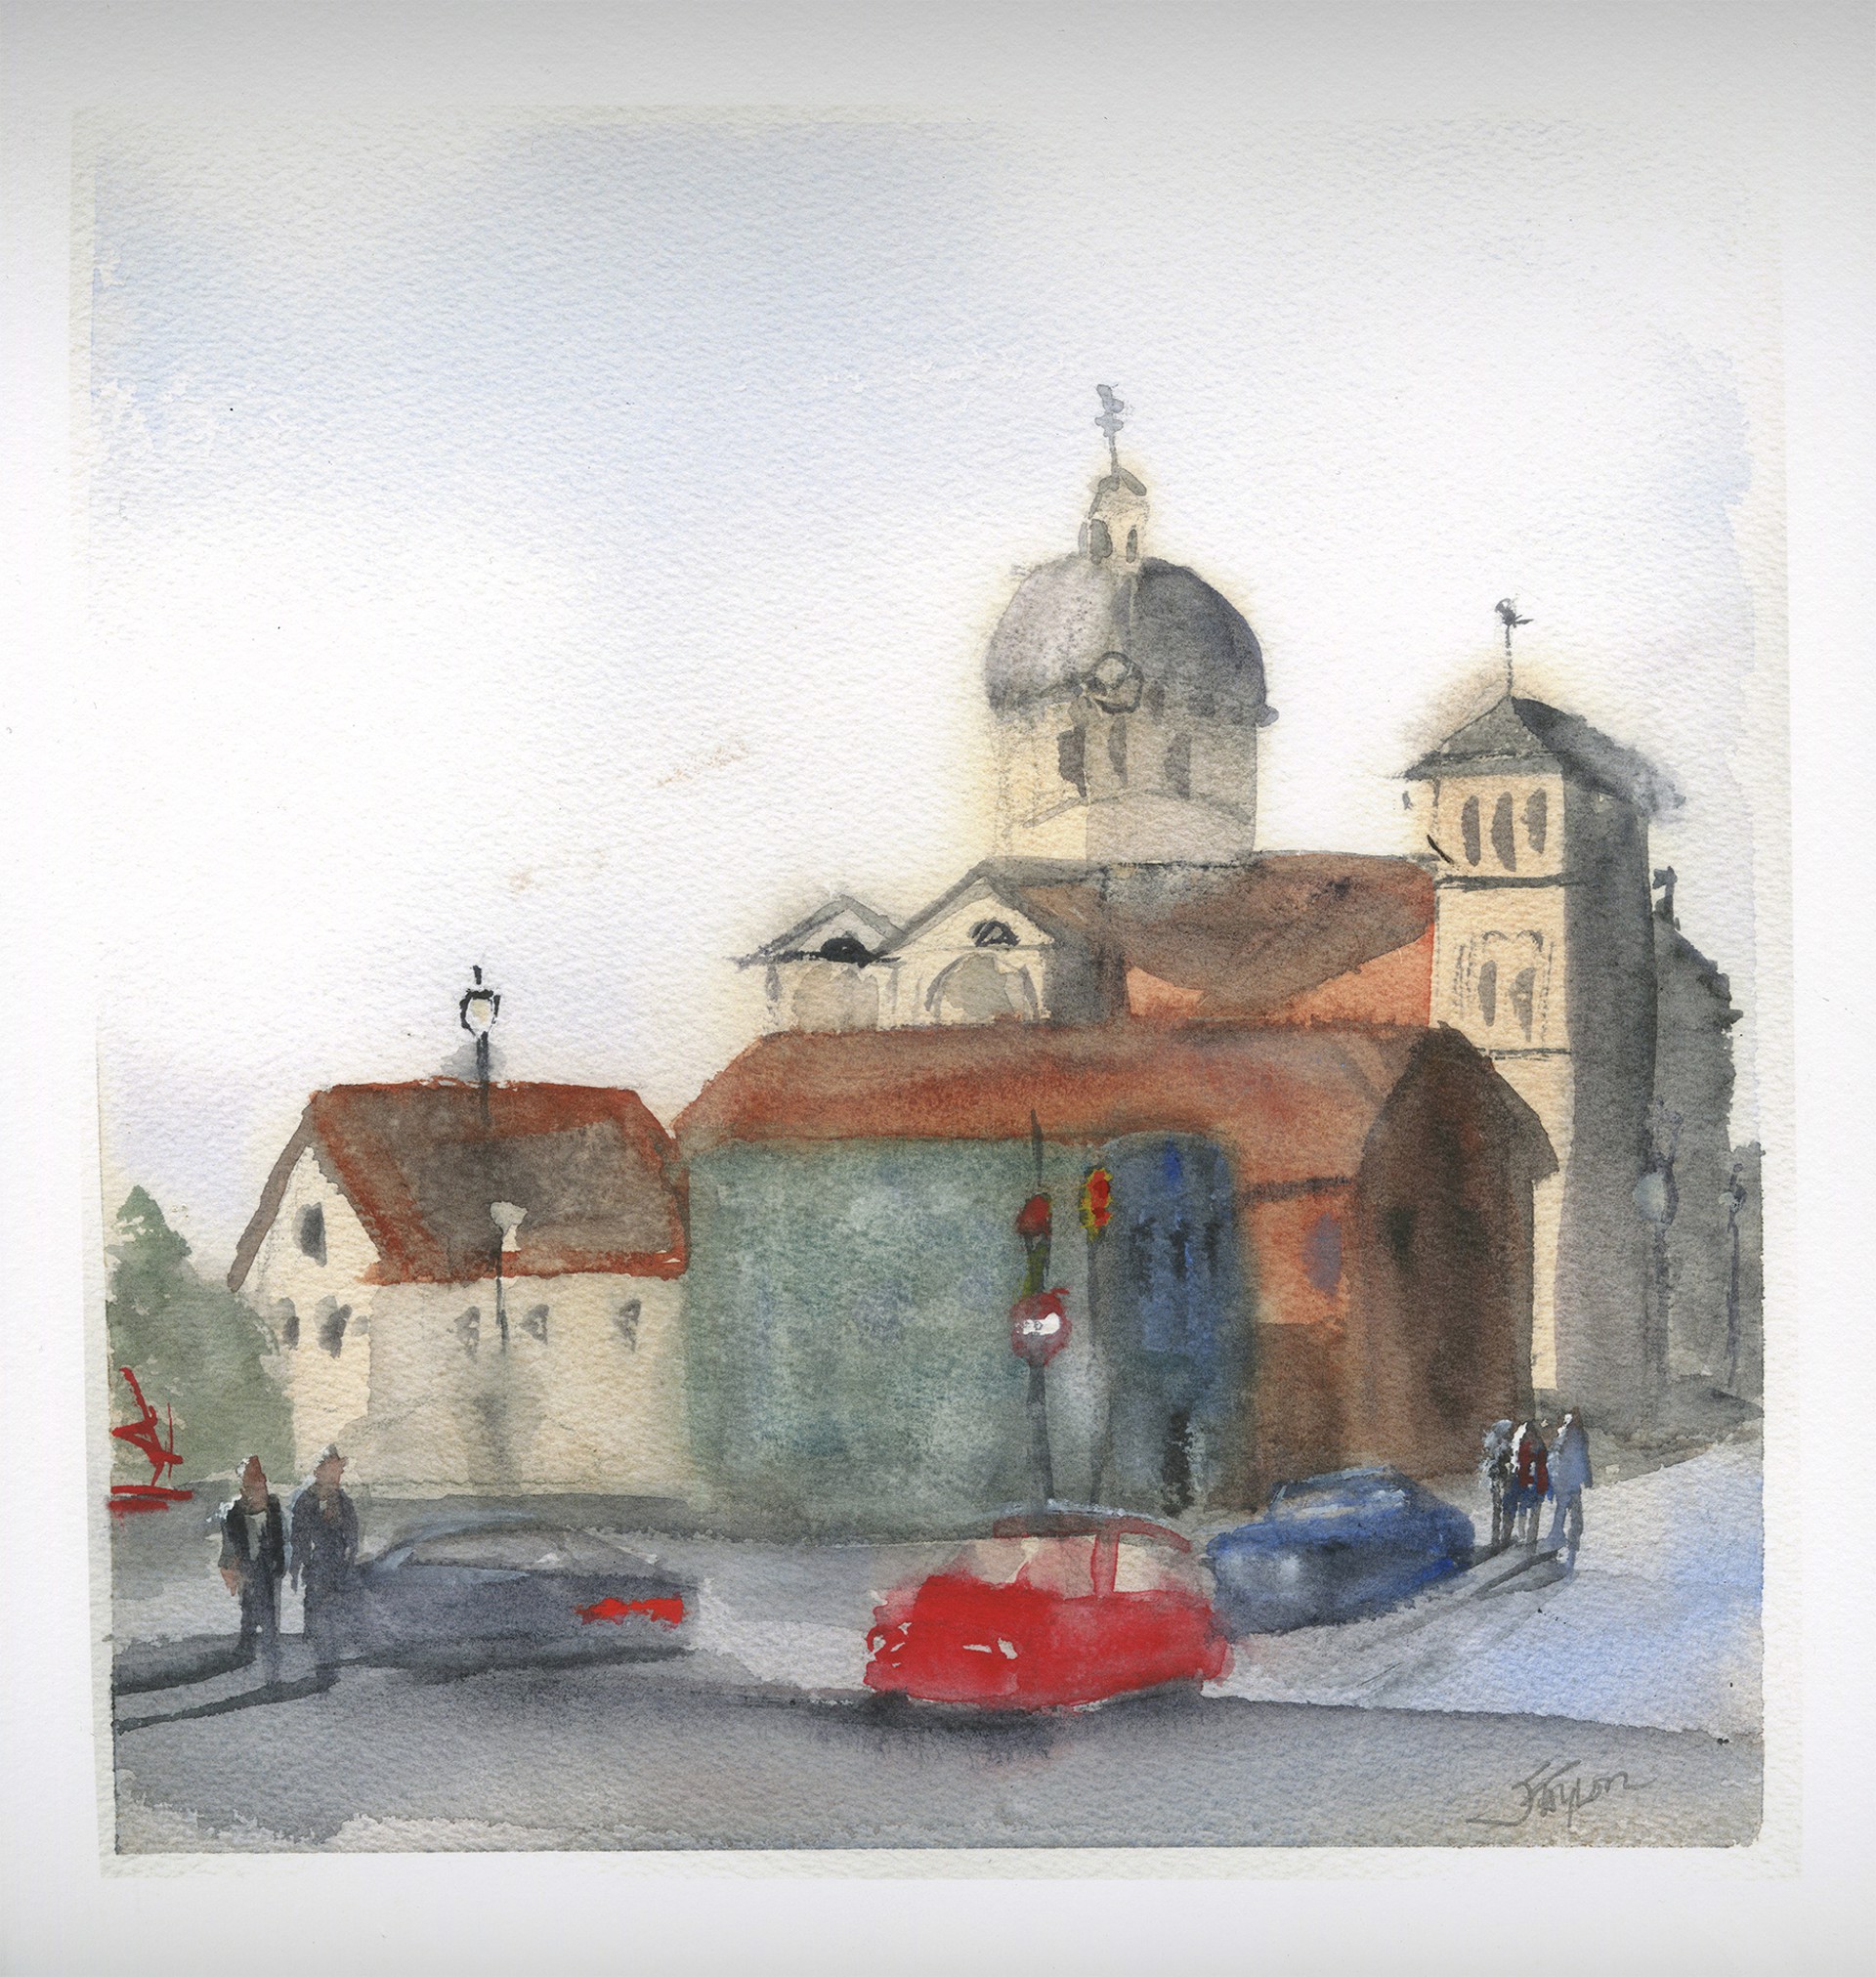 The Basilica of St. Josaphat by Julia Taylor